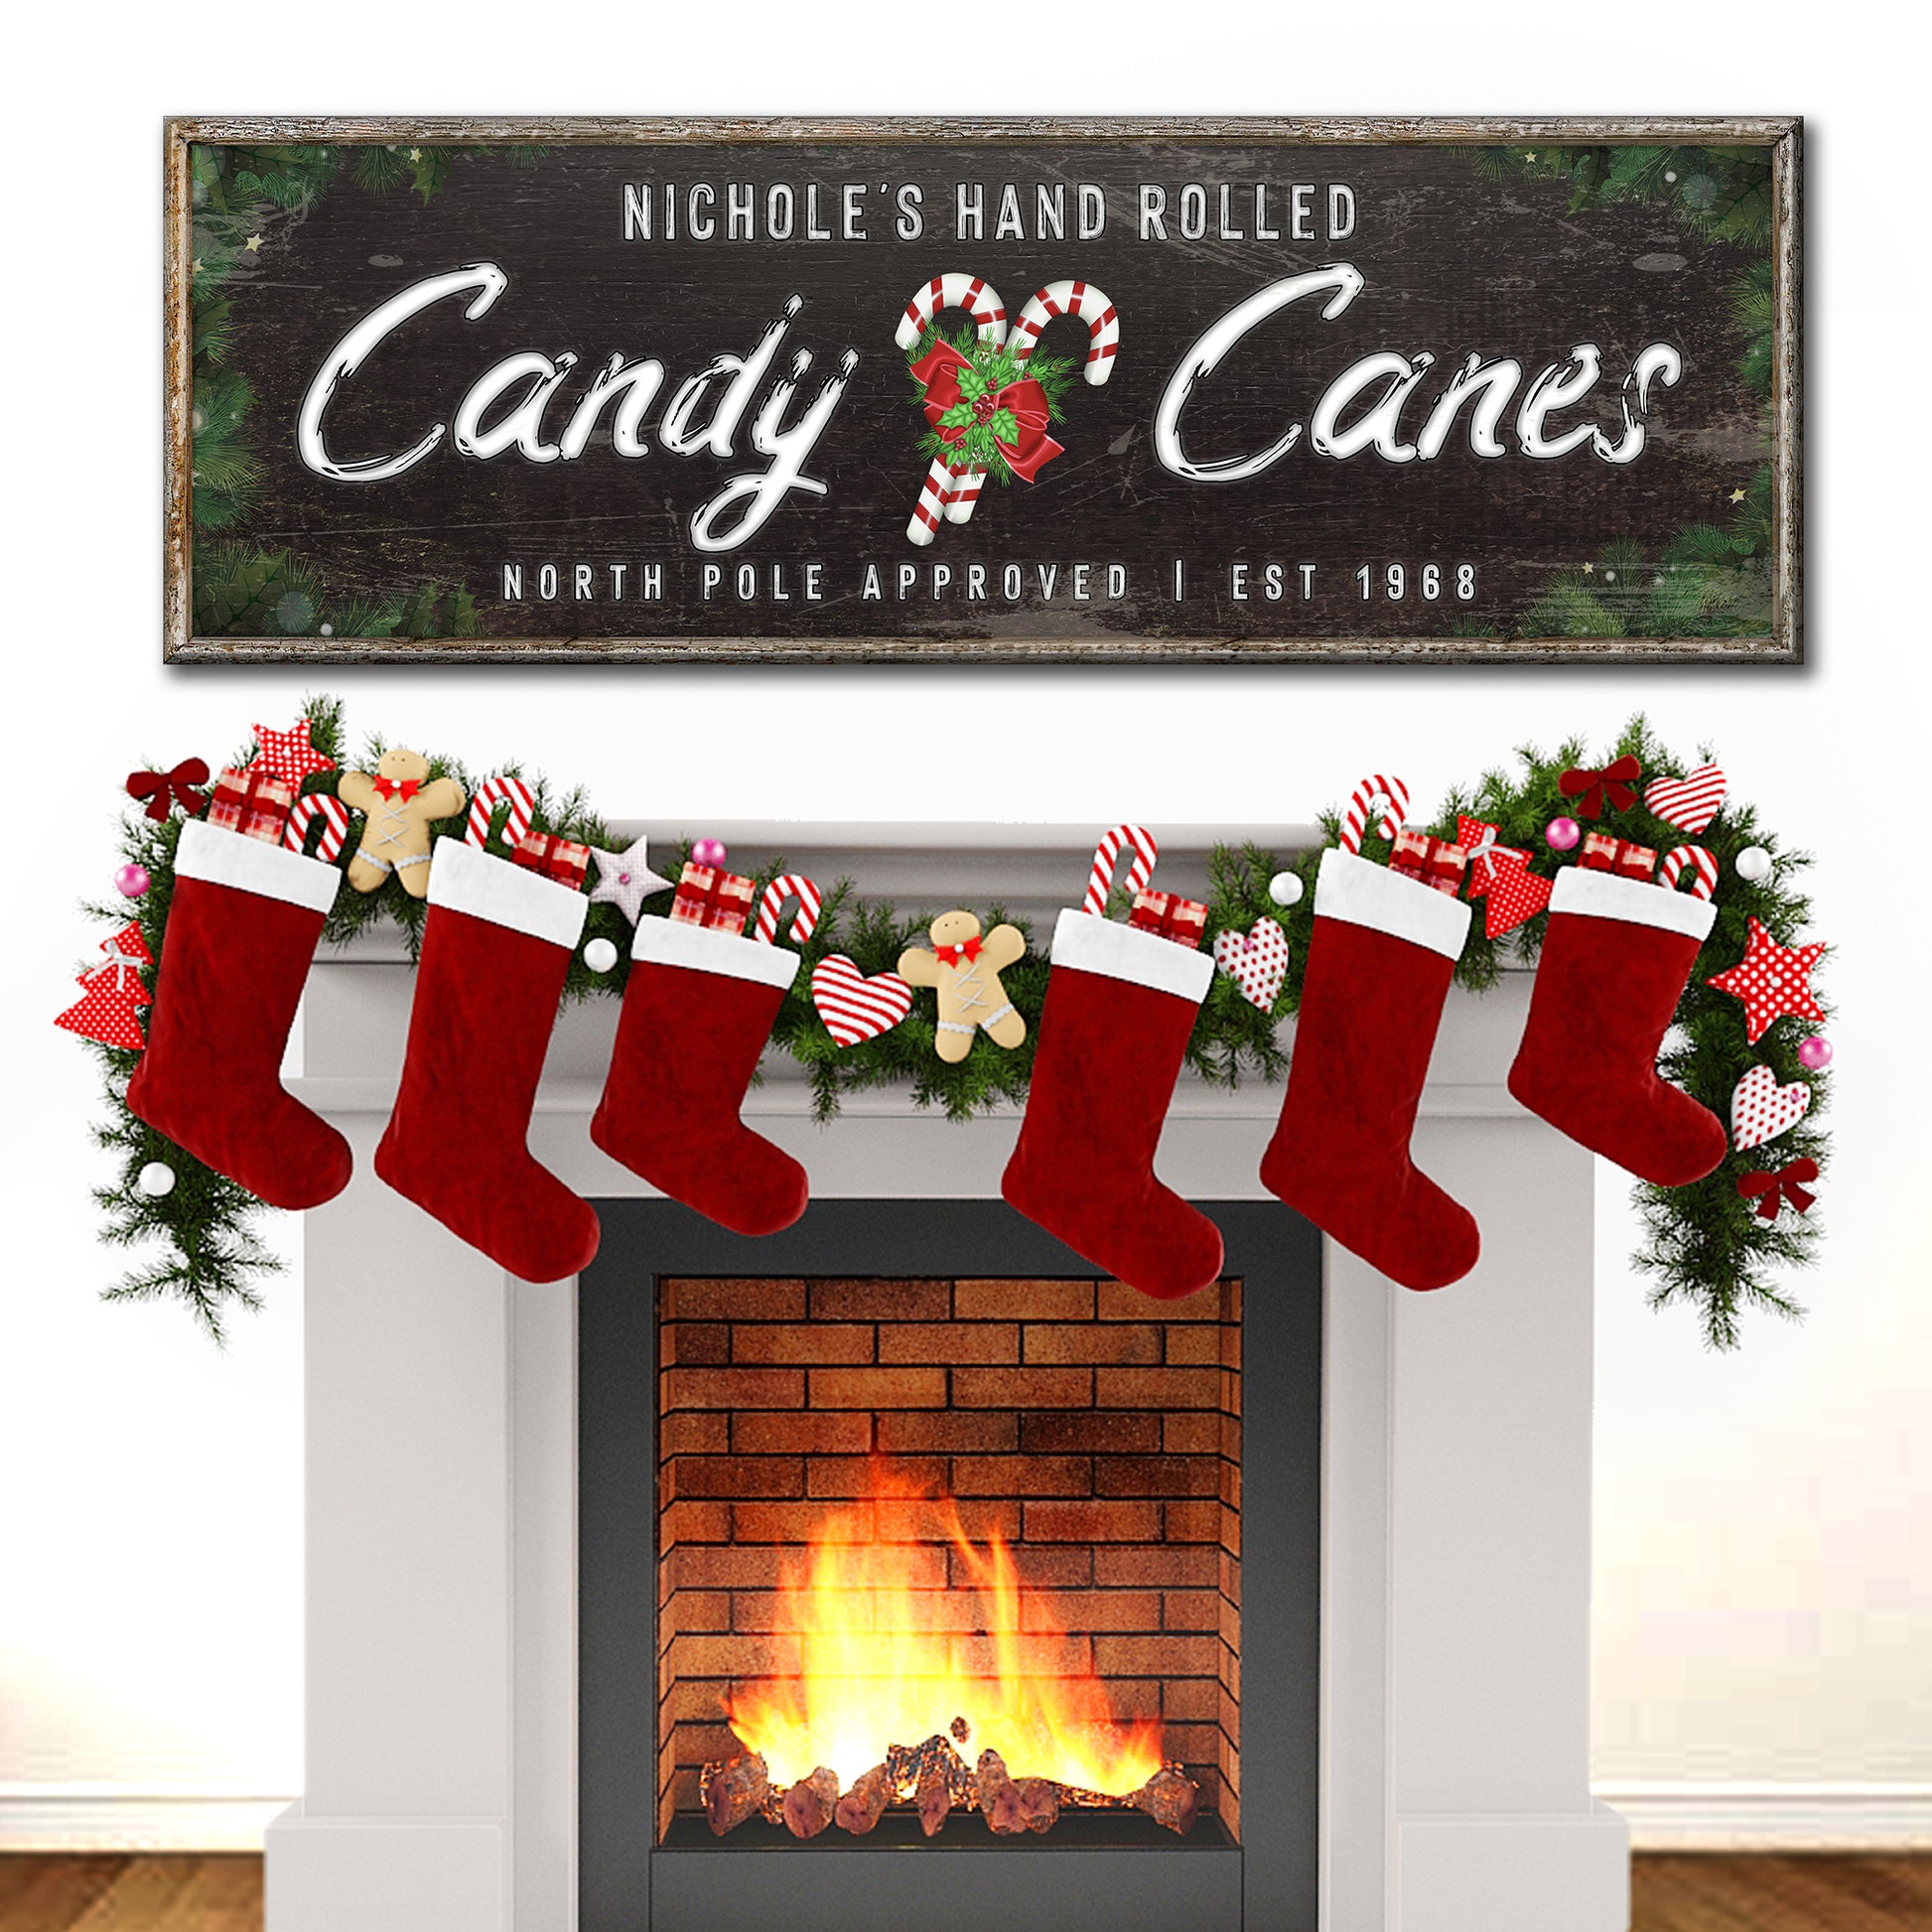 North Pole Candy Canes Sign - Wall Art Image by Tailored Canvases